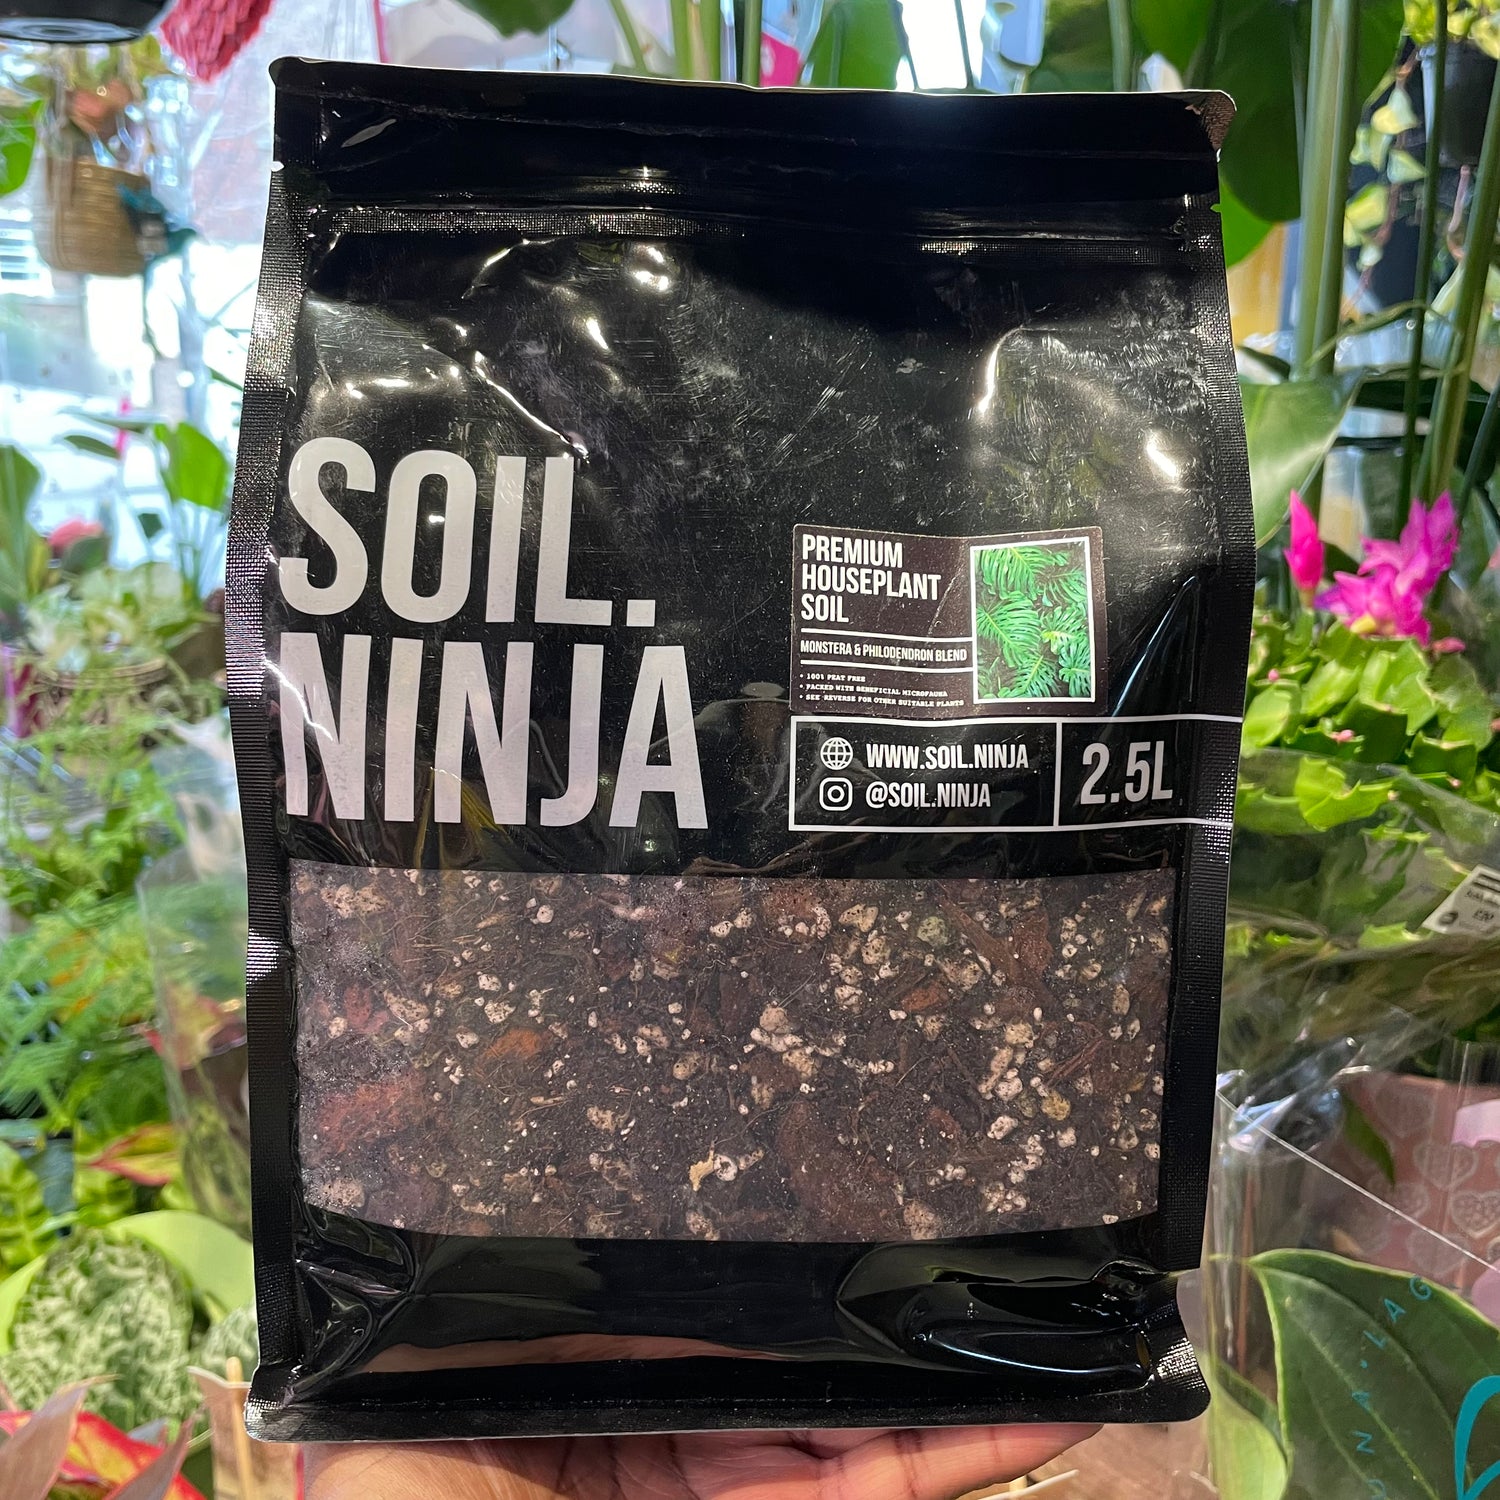 A bag of Soil Ninja | Monstera and Philodendron 2.5L in Urban Tropicana’s store in Chiswick, London.